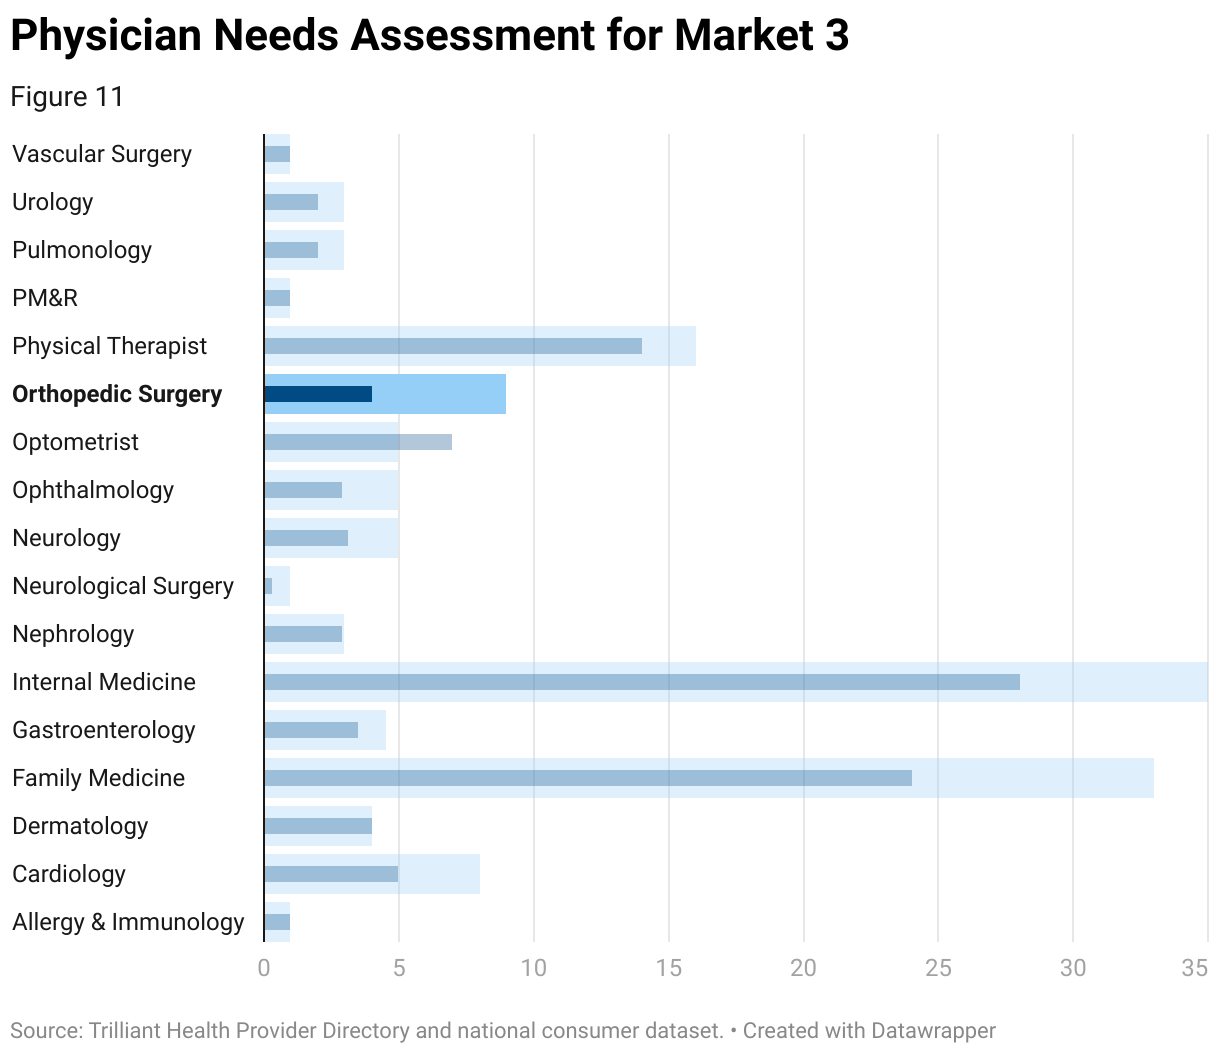 A bullet chart shows the shortage and surplus of physicians by specialty in Market 3. The shortage of orthopedic surgeons is highlighted.